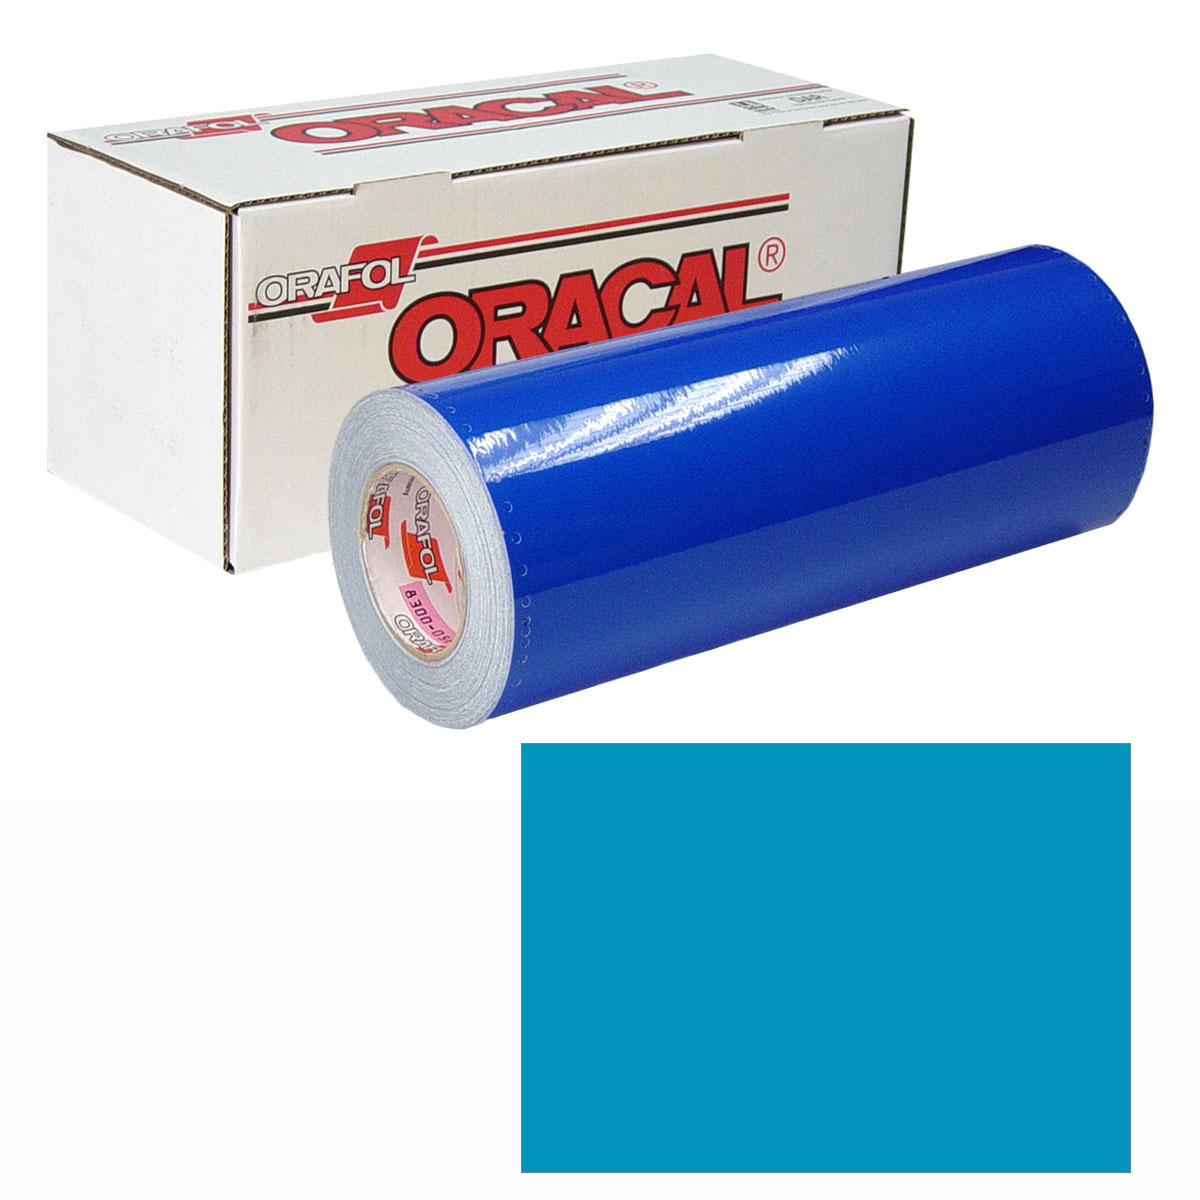 ORACAL 631 30in X 10yd 174 Teal